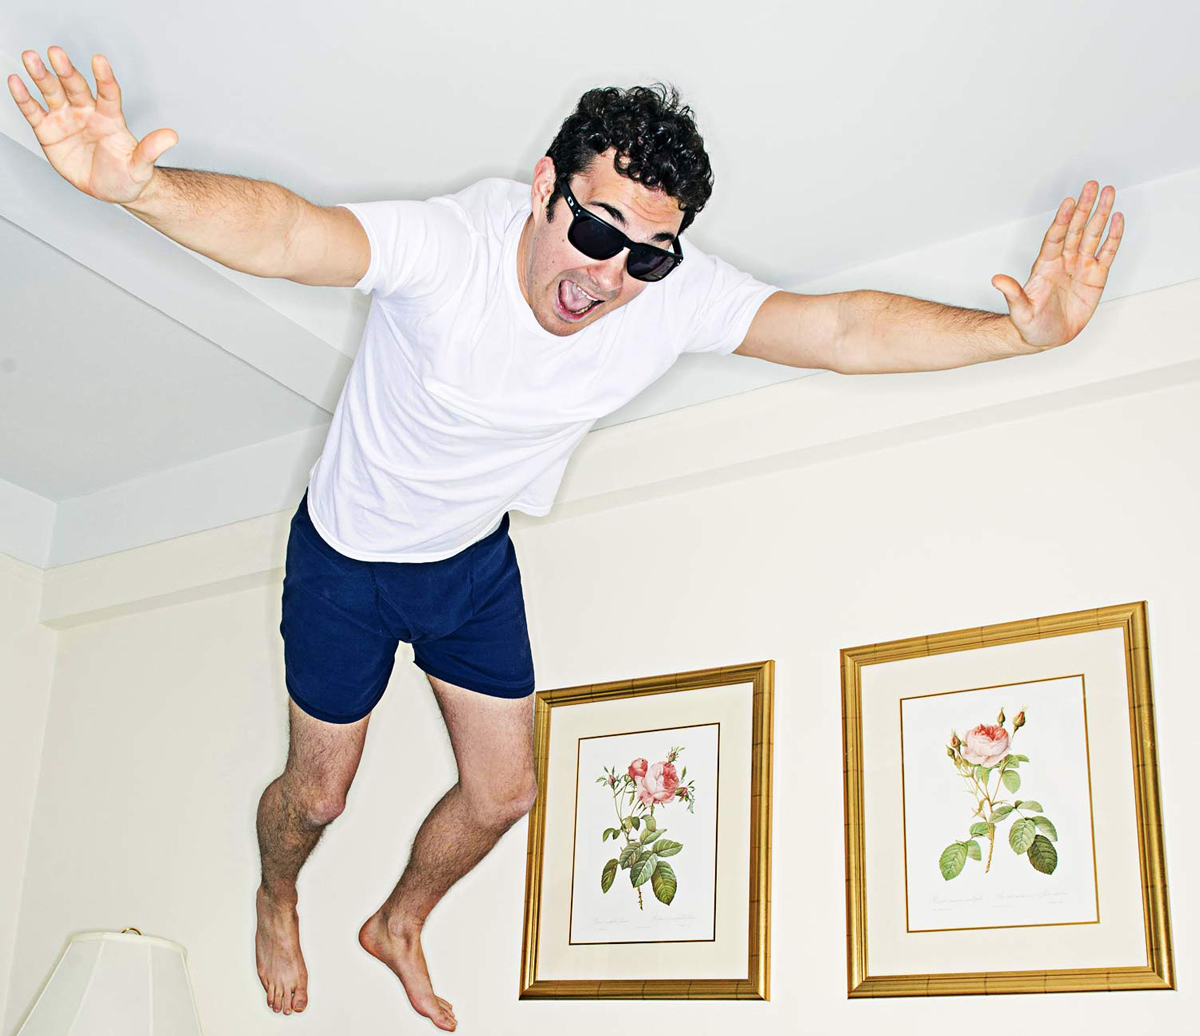 Mark Normand jumping onto bed in the air. He wears sunglasses and a white under shirt and blue shirts. Two prints of roses hanging on the beige wall behind him. 